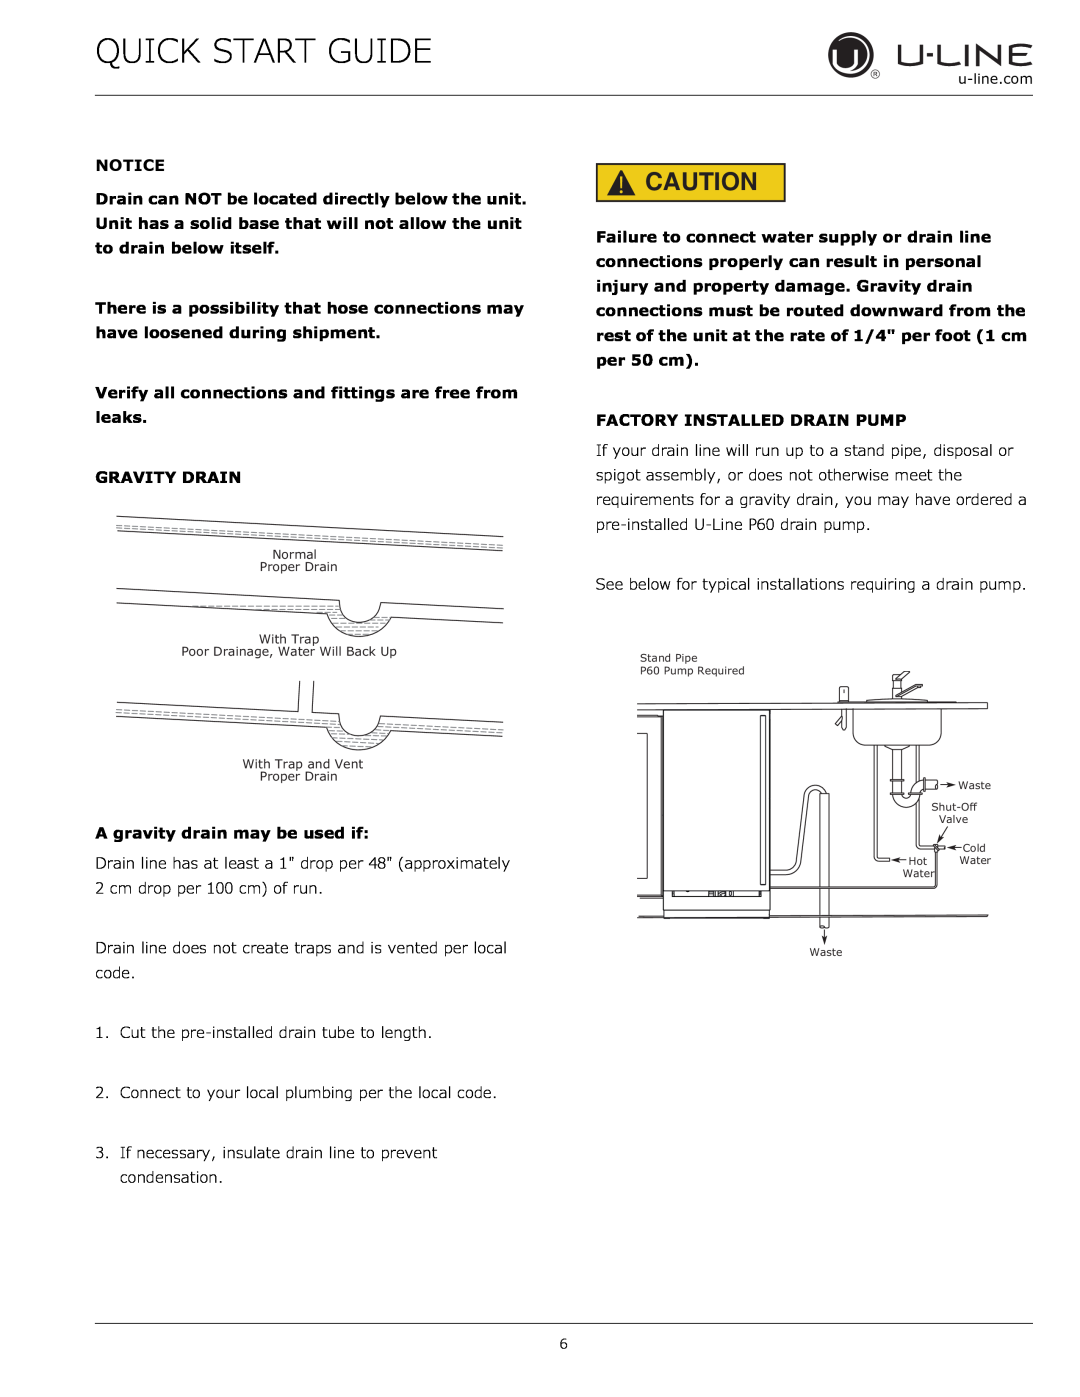 U-Line CLR1215 quick start Quick Start Guide, Verify all connections and fittings are free from leaks GRAVITY DRAIN 